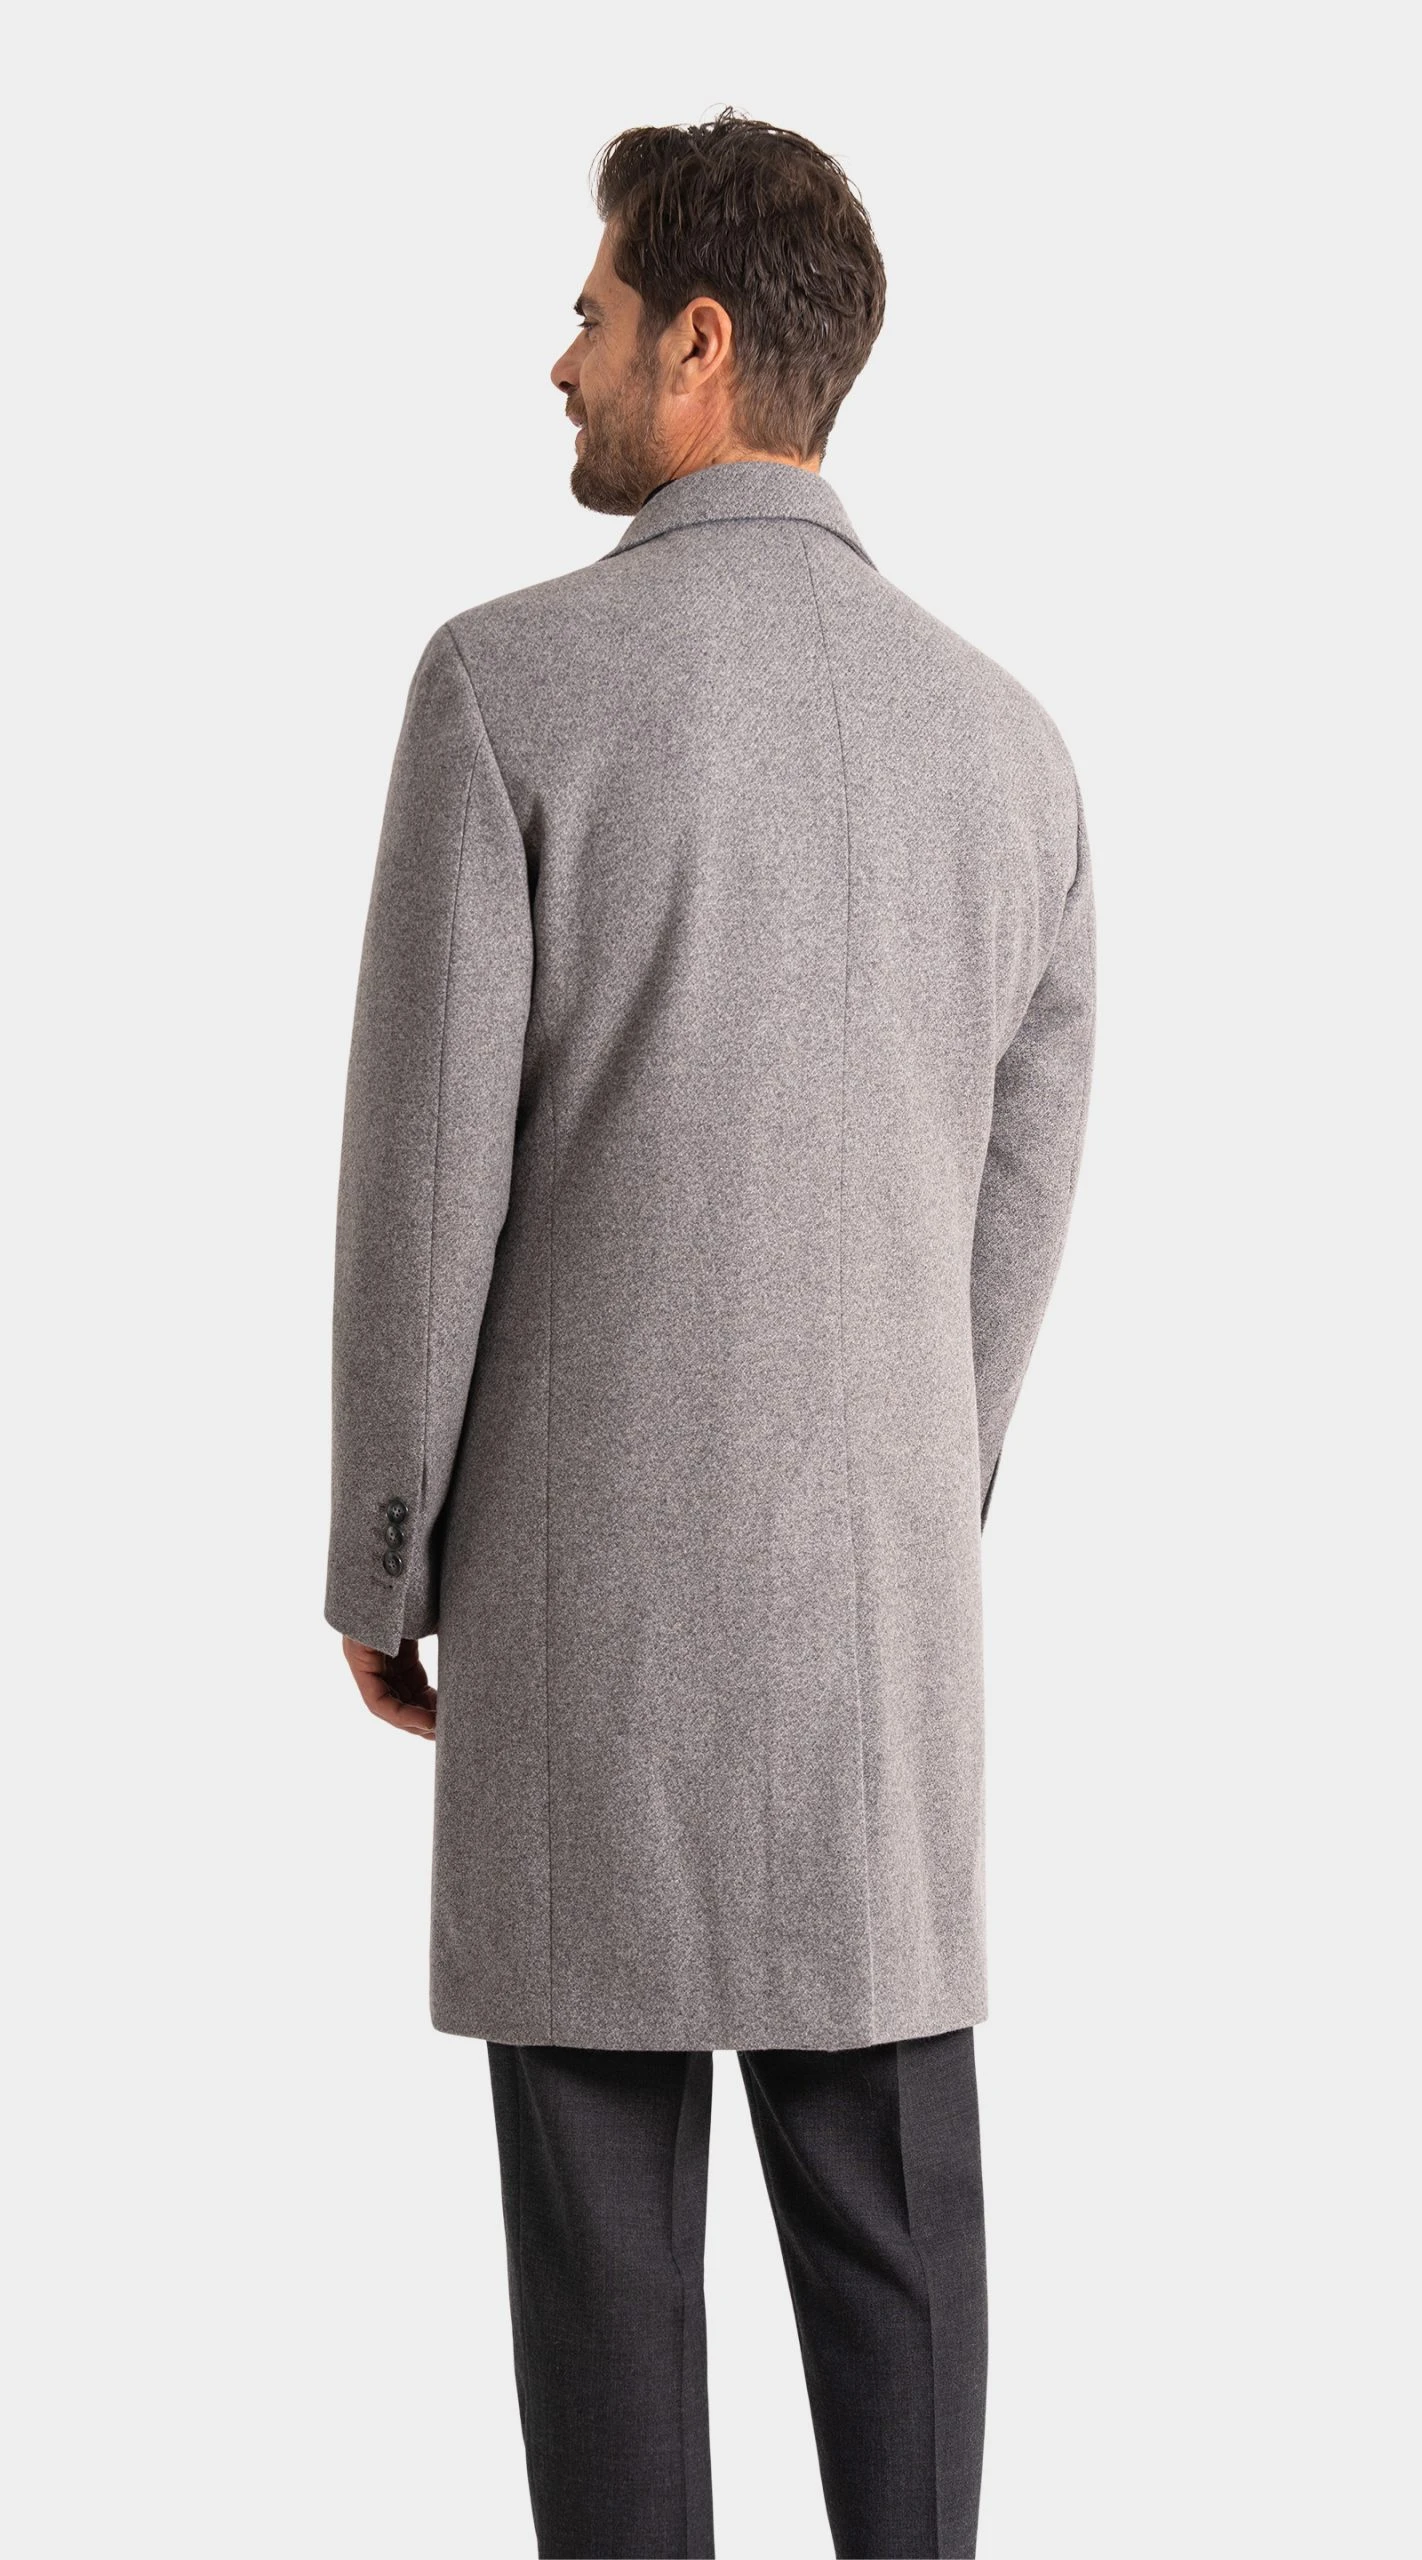 men's Light Grey Wool and Cashmere Overcoat back